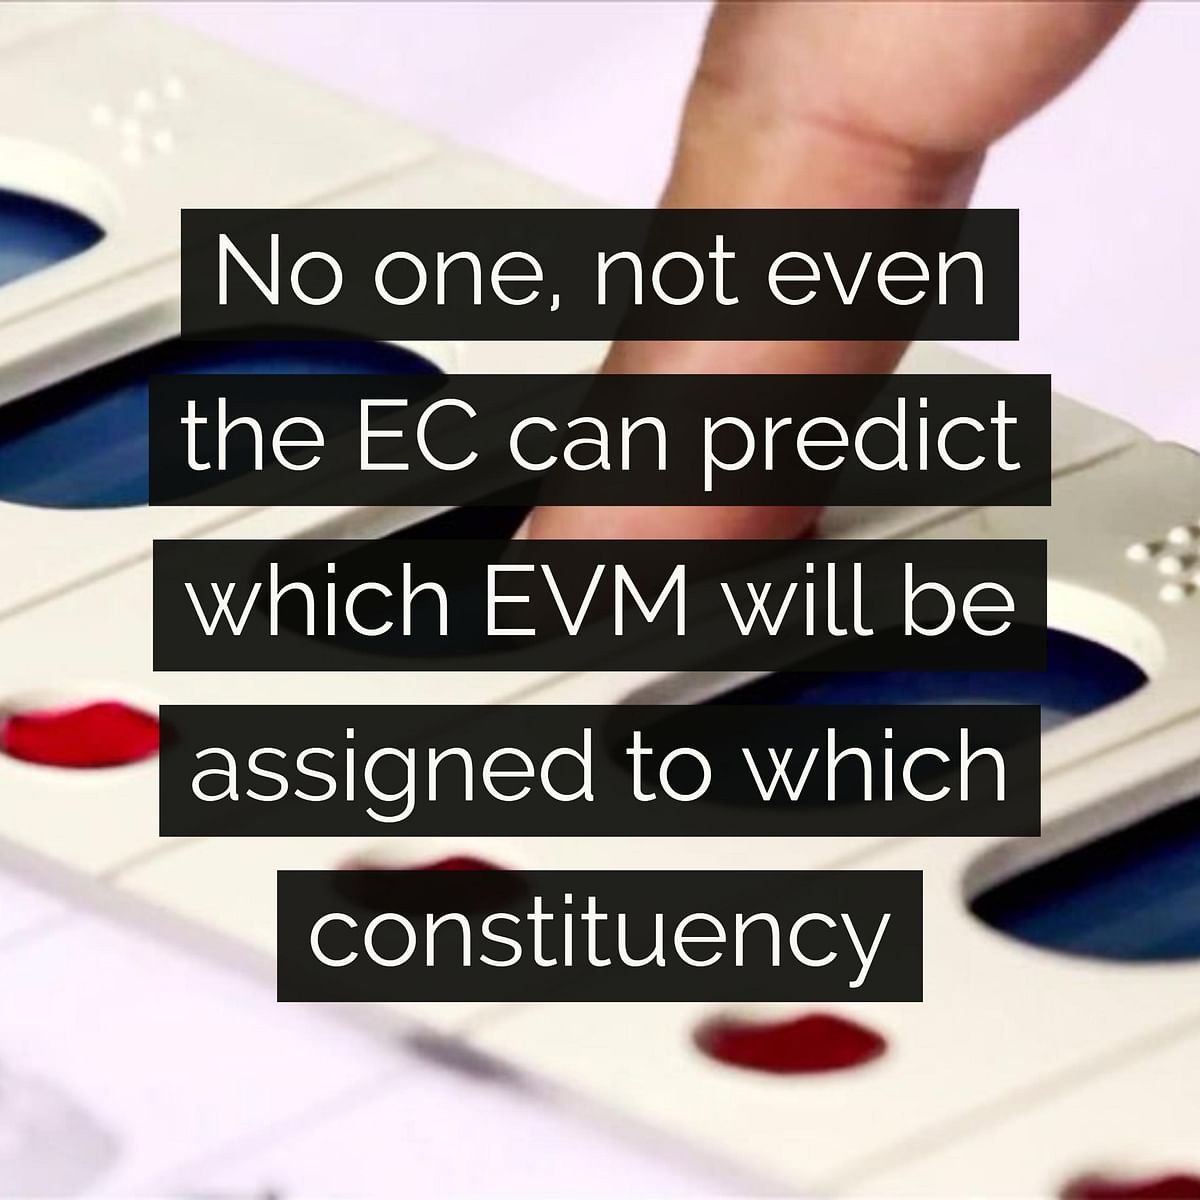 Here’s the Election Commission’s defence of their EVMs, stating the measures taken to ensure they are tamper-proof.